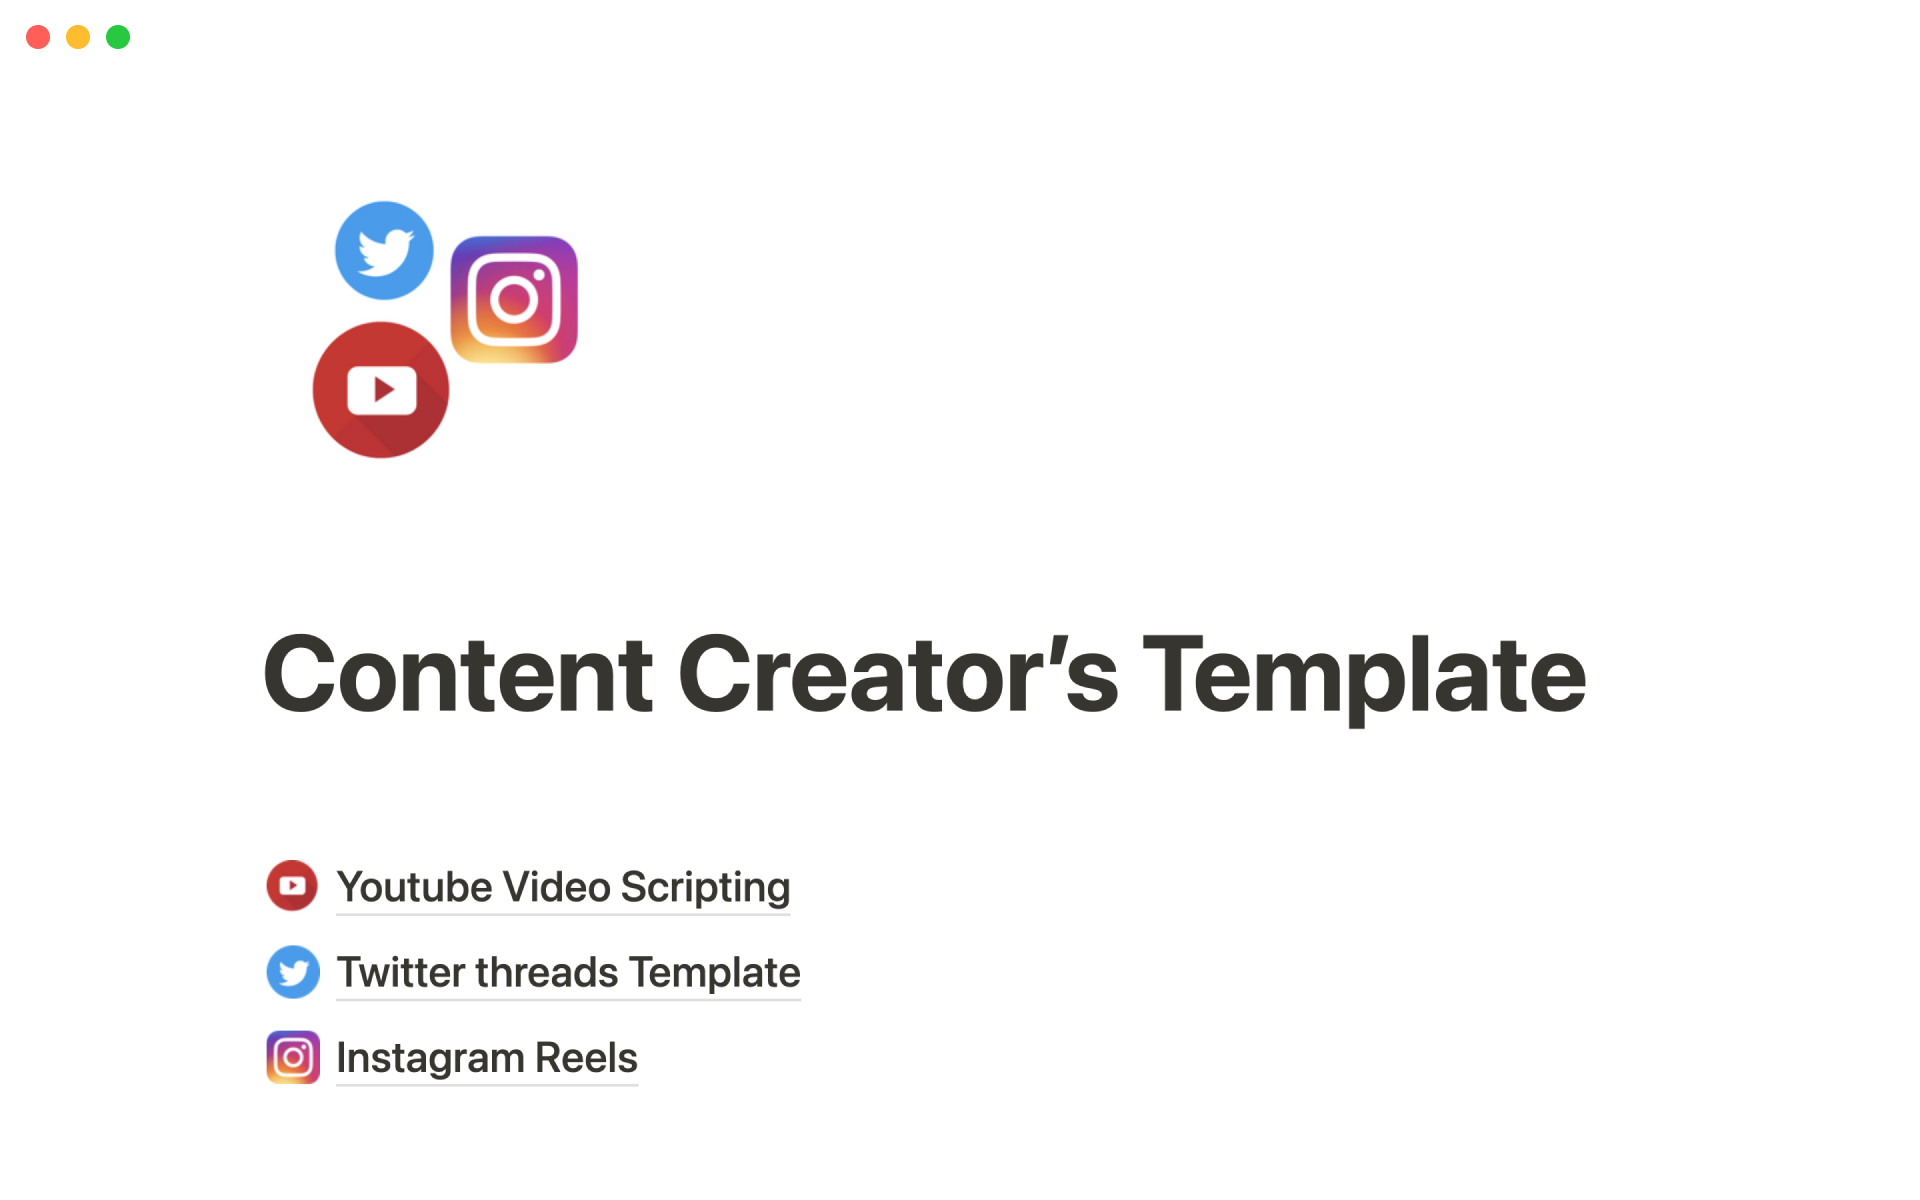 Helps creators plan their content for YouTube, Twitter, and Instagram.